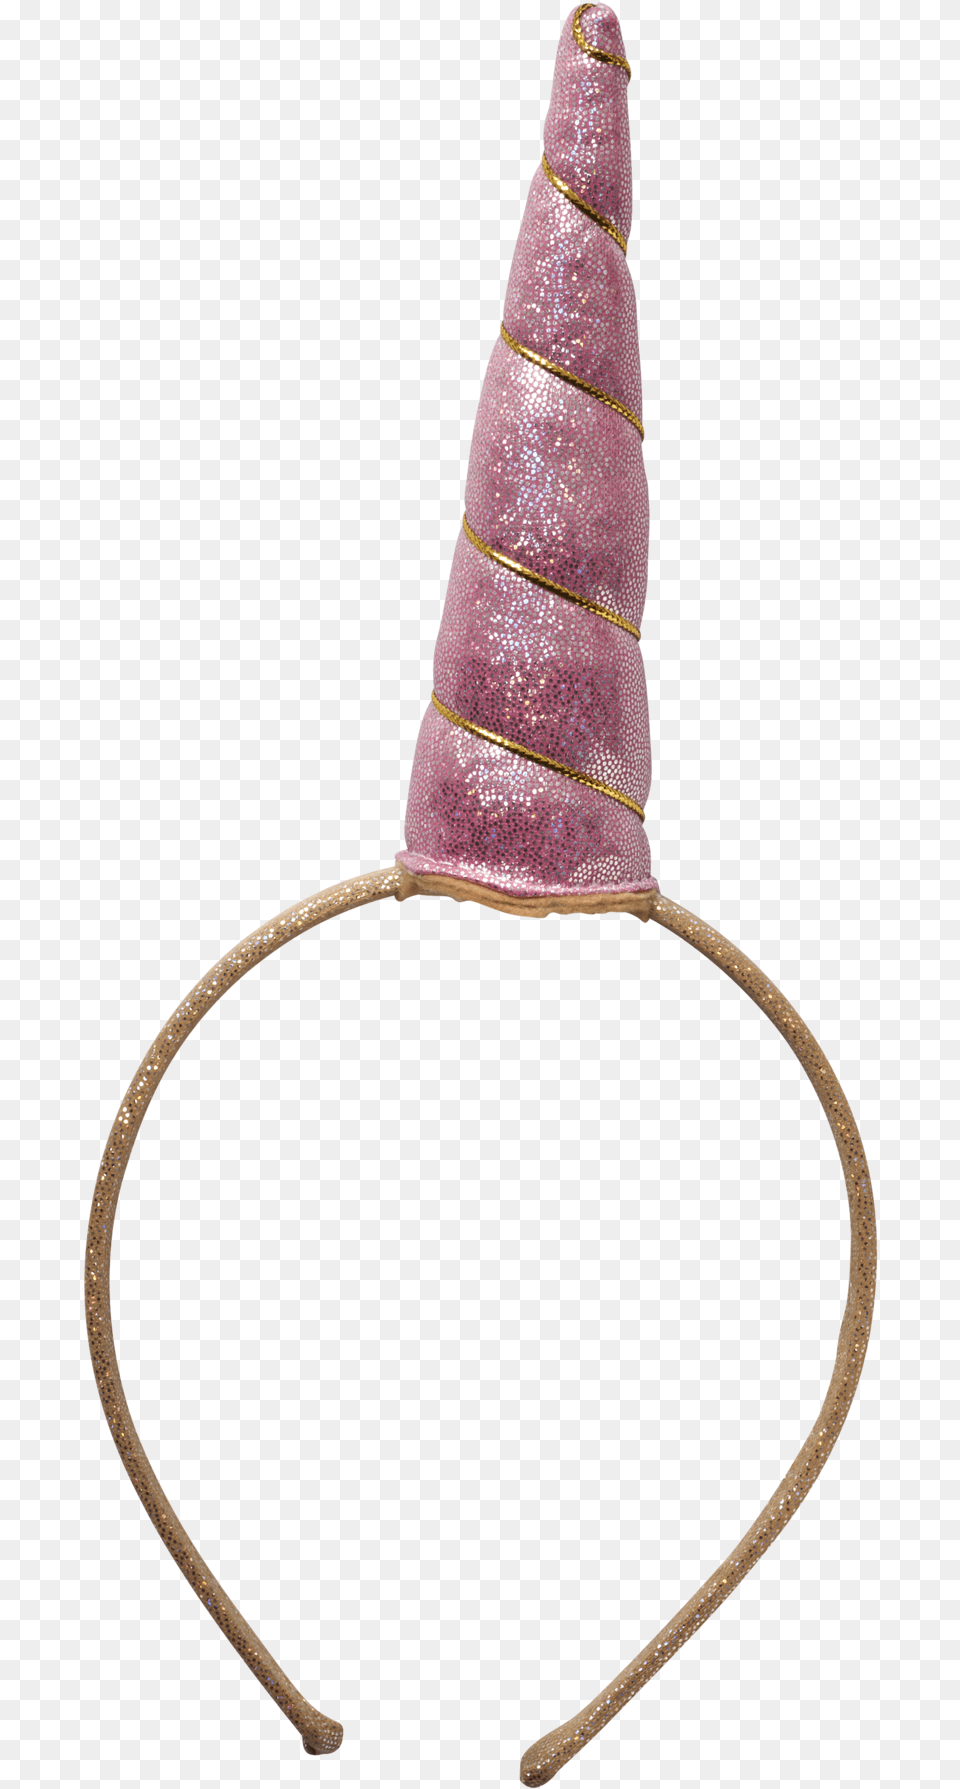 Unicornhorngold The Original Party Bag Company Unicorn Hrbjle, Clothing, Hat, Cone, Bow Free Transparent Png